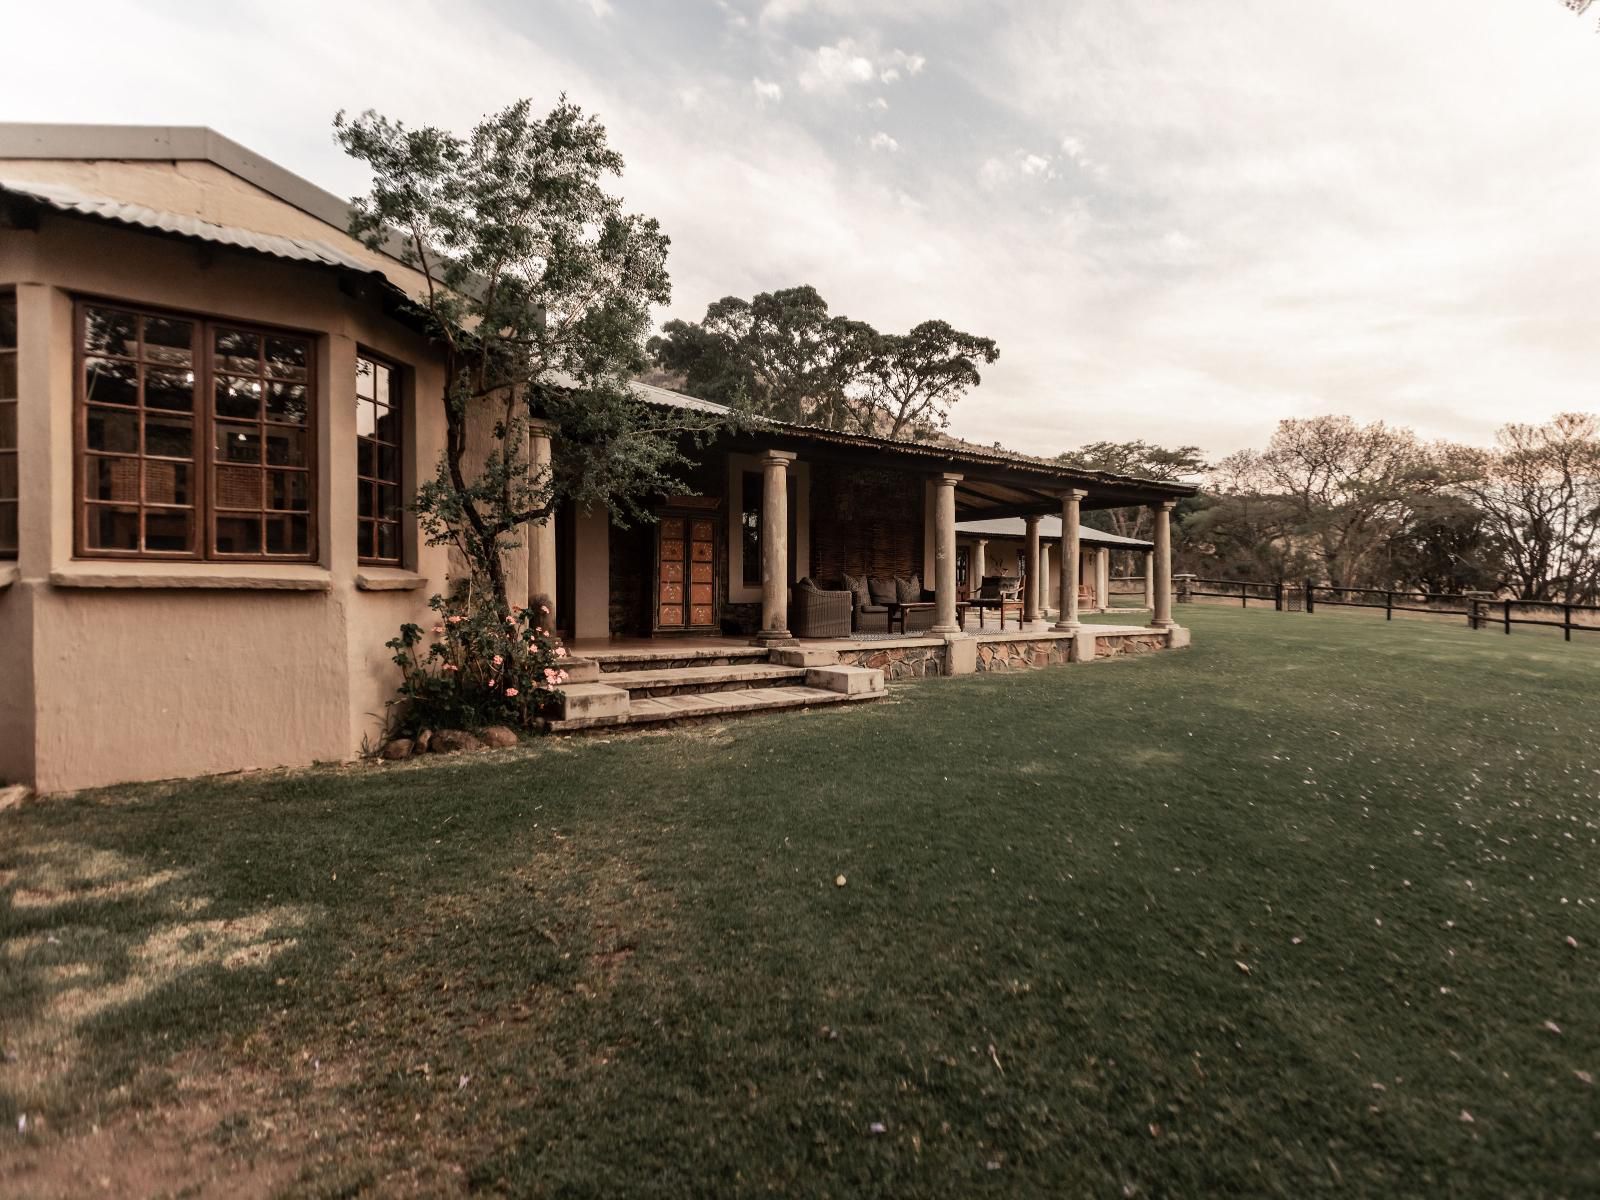 Dawsons Game And Trout Lodge Badplaas Mpumalanga South Africa House, Building, Architecture